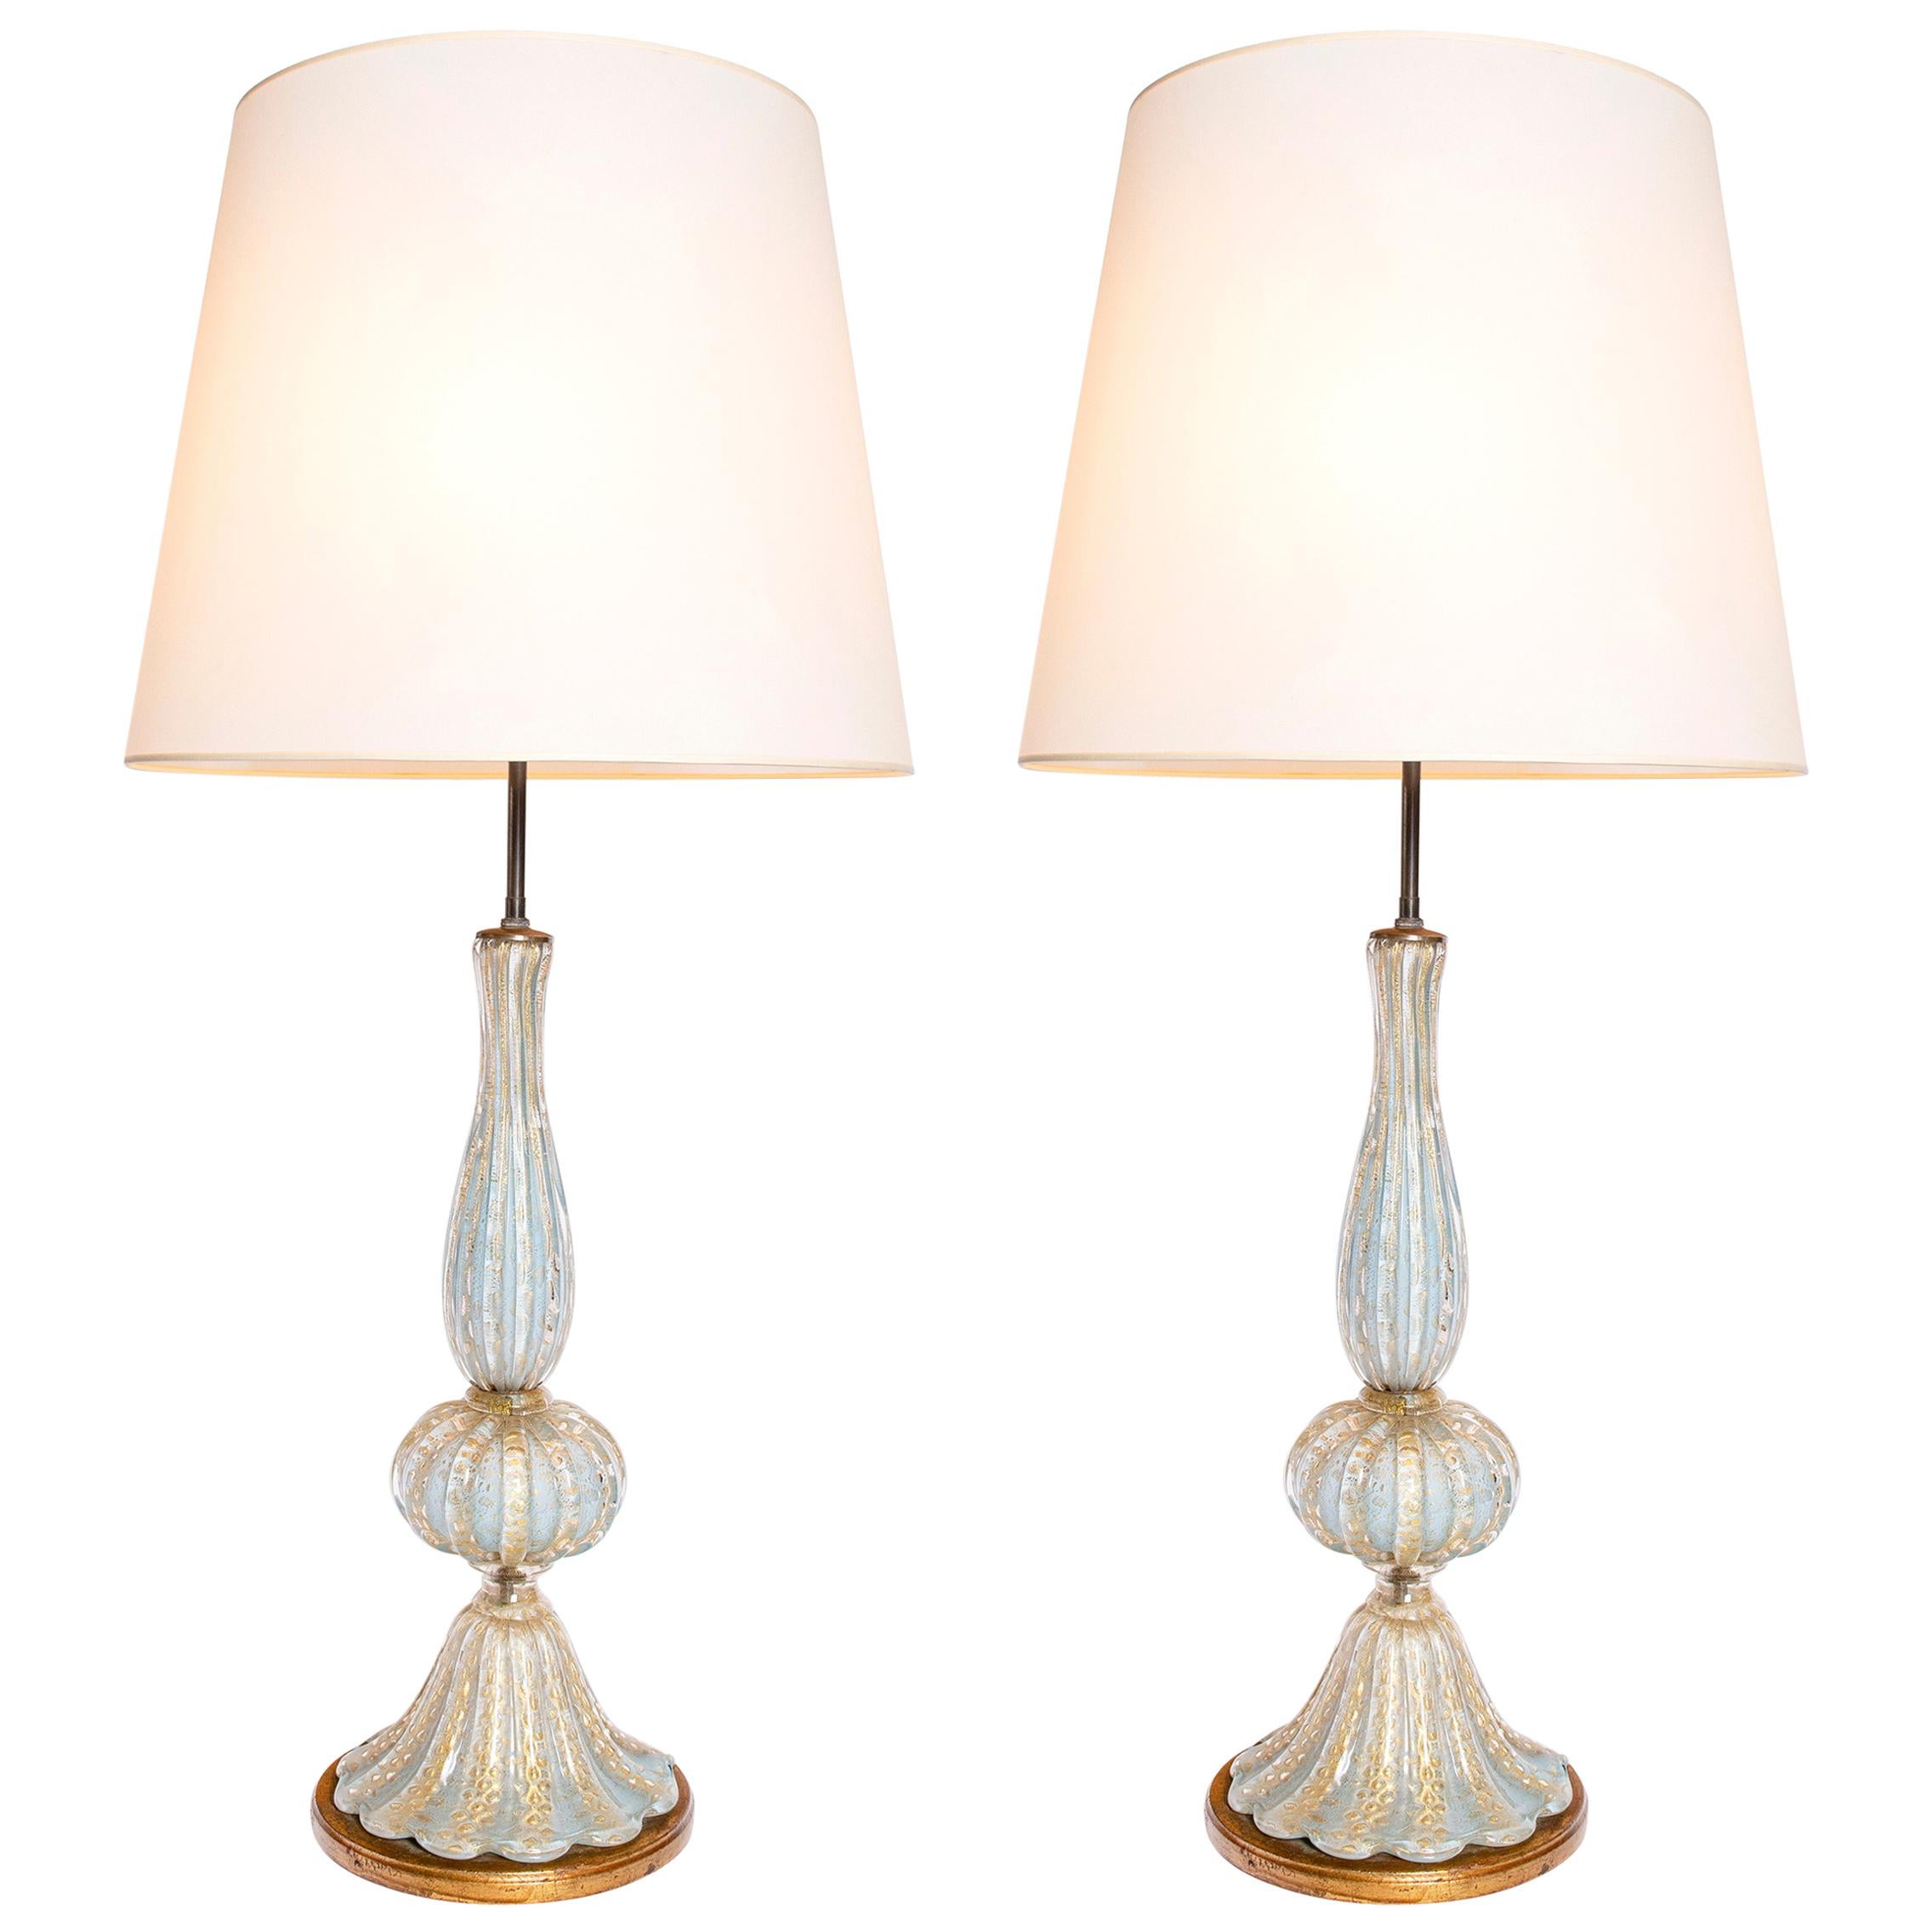 Pair of Murano Glass with Gold Inclusions Table Lamps by Barovier & Toso, Italy